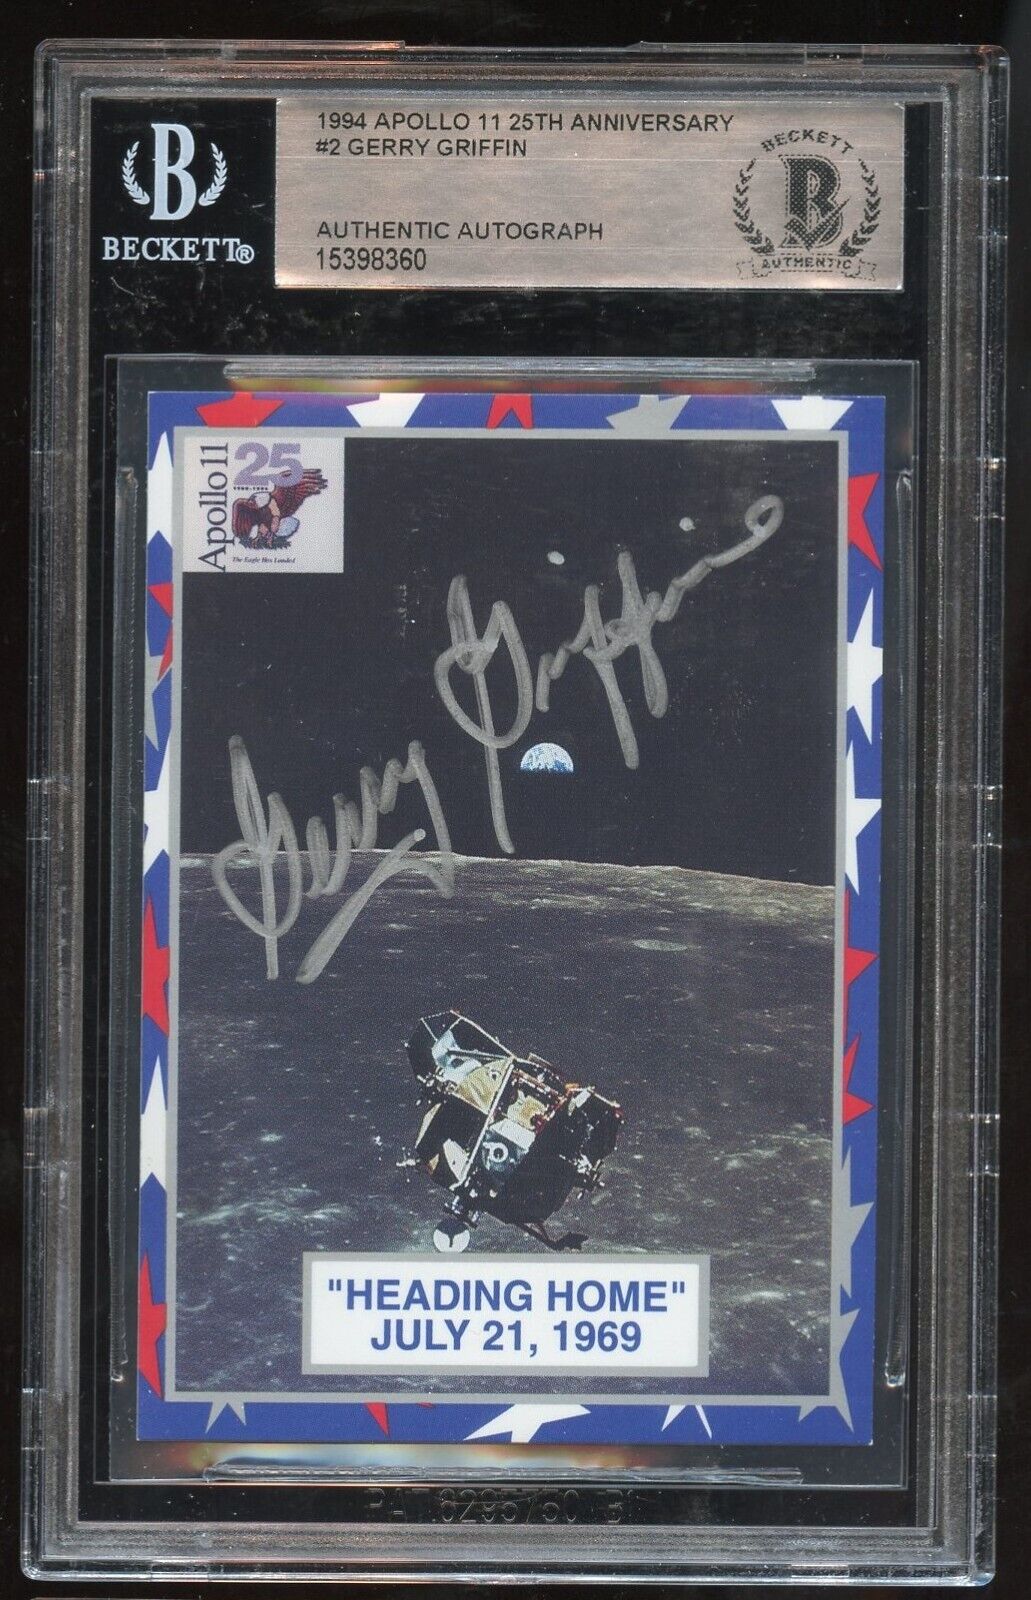 Gerry Griffin #2 signed autograph 1994 Apollo 11 25th Anniversary BAS Slabbed